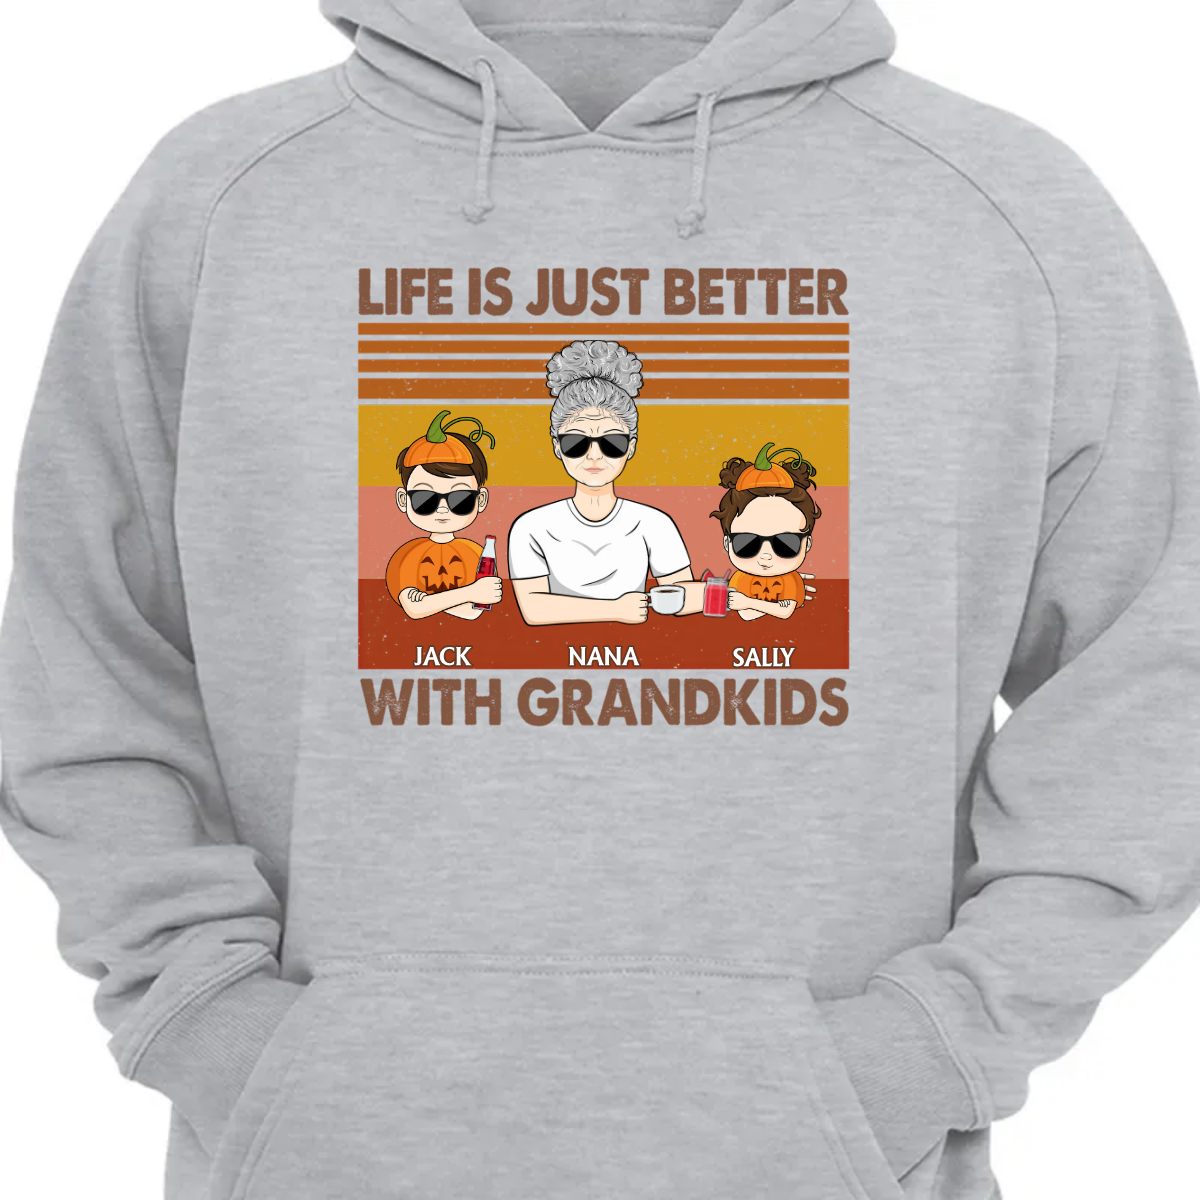 Life Is Better With Grandkids - Gift For Grandmother - Personalized Custom Hoodie Sweatshirt